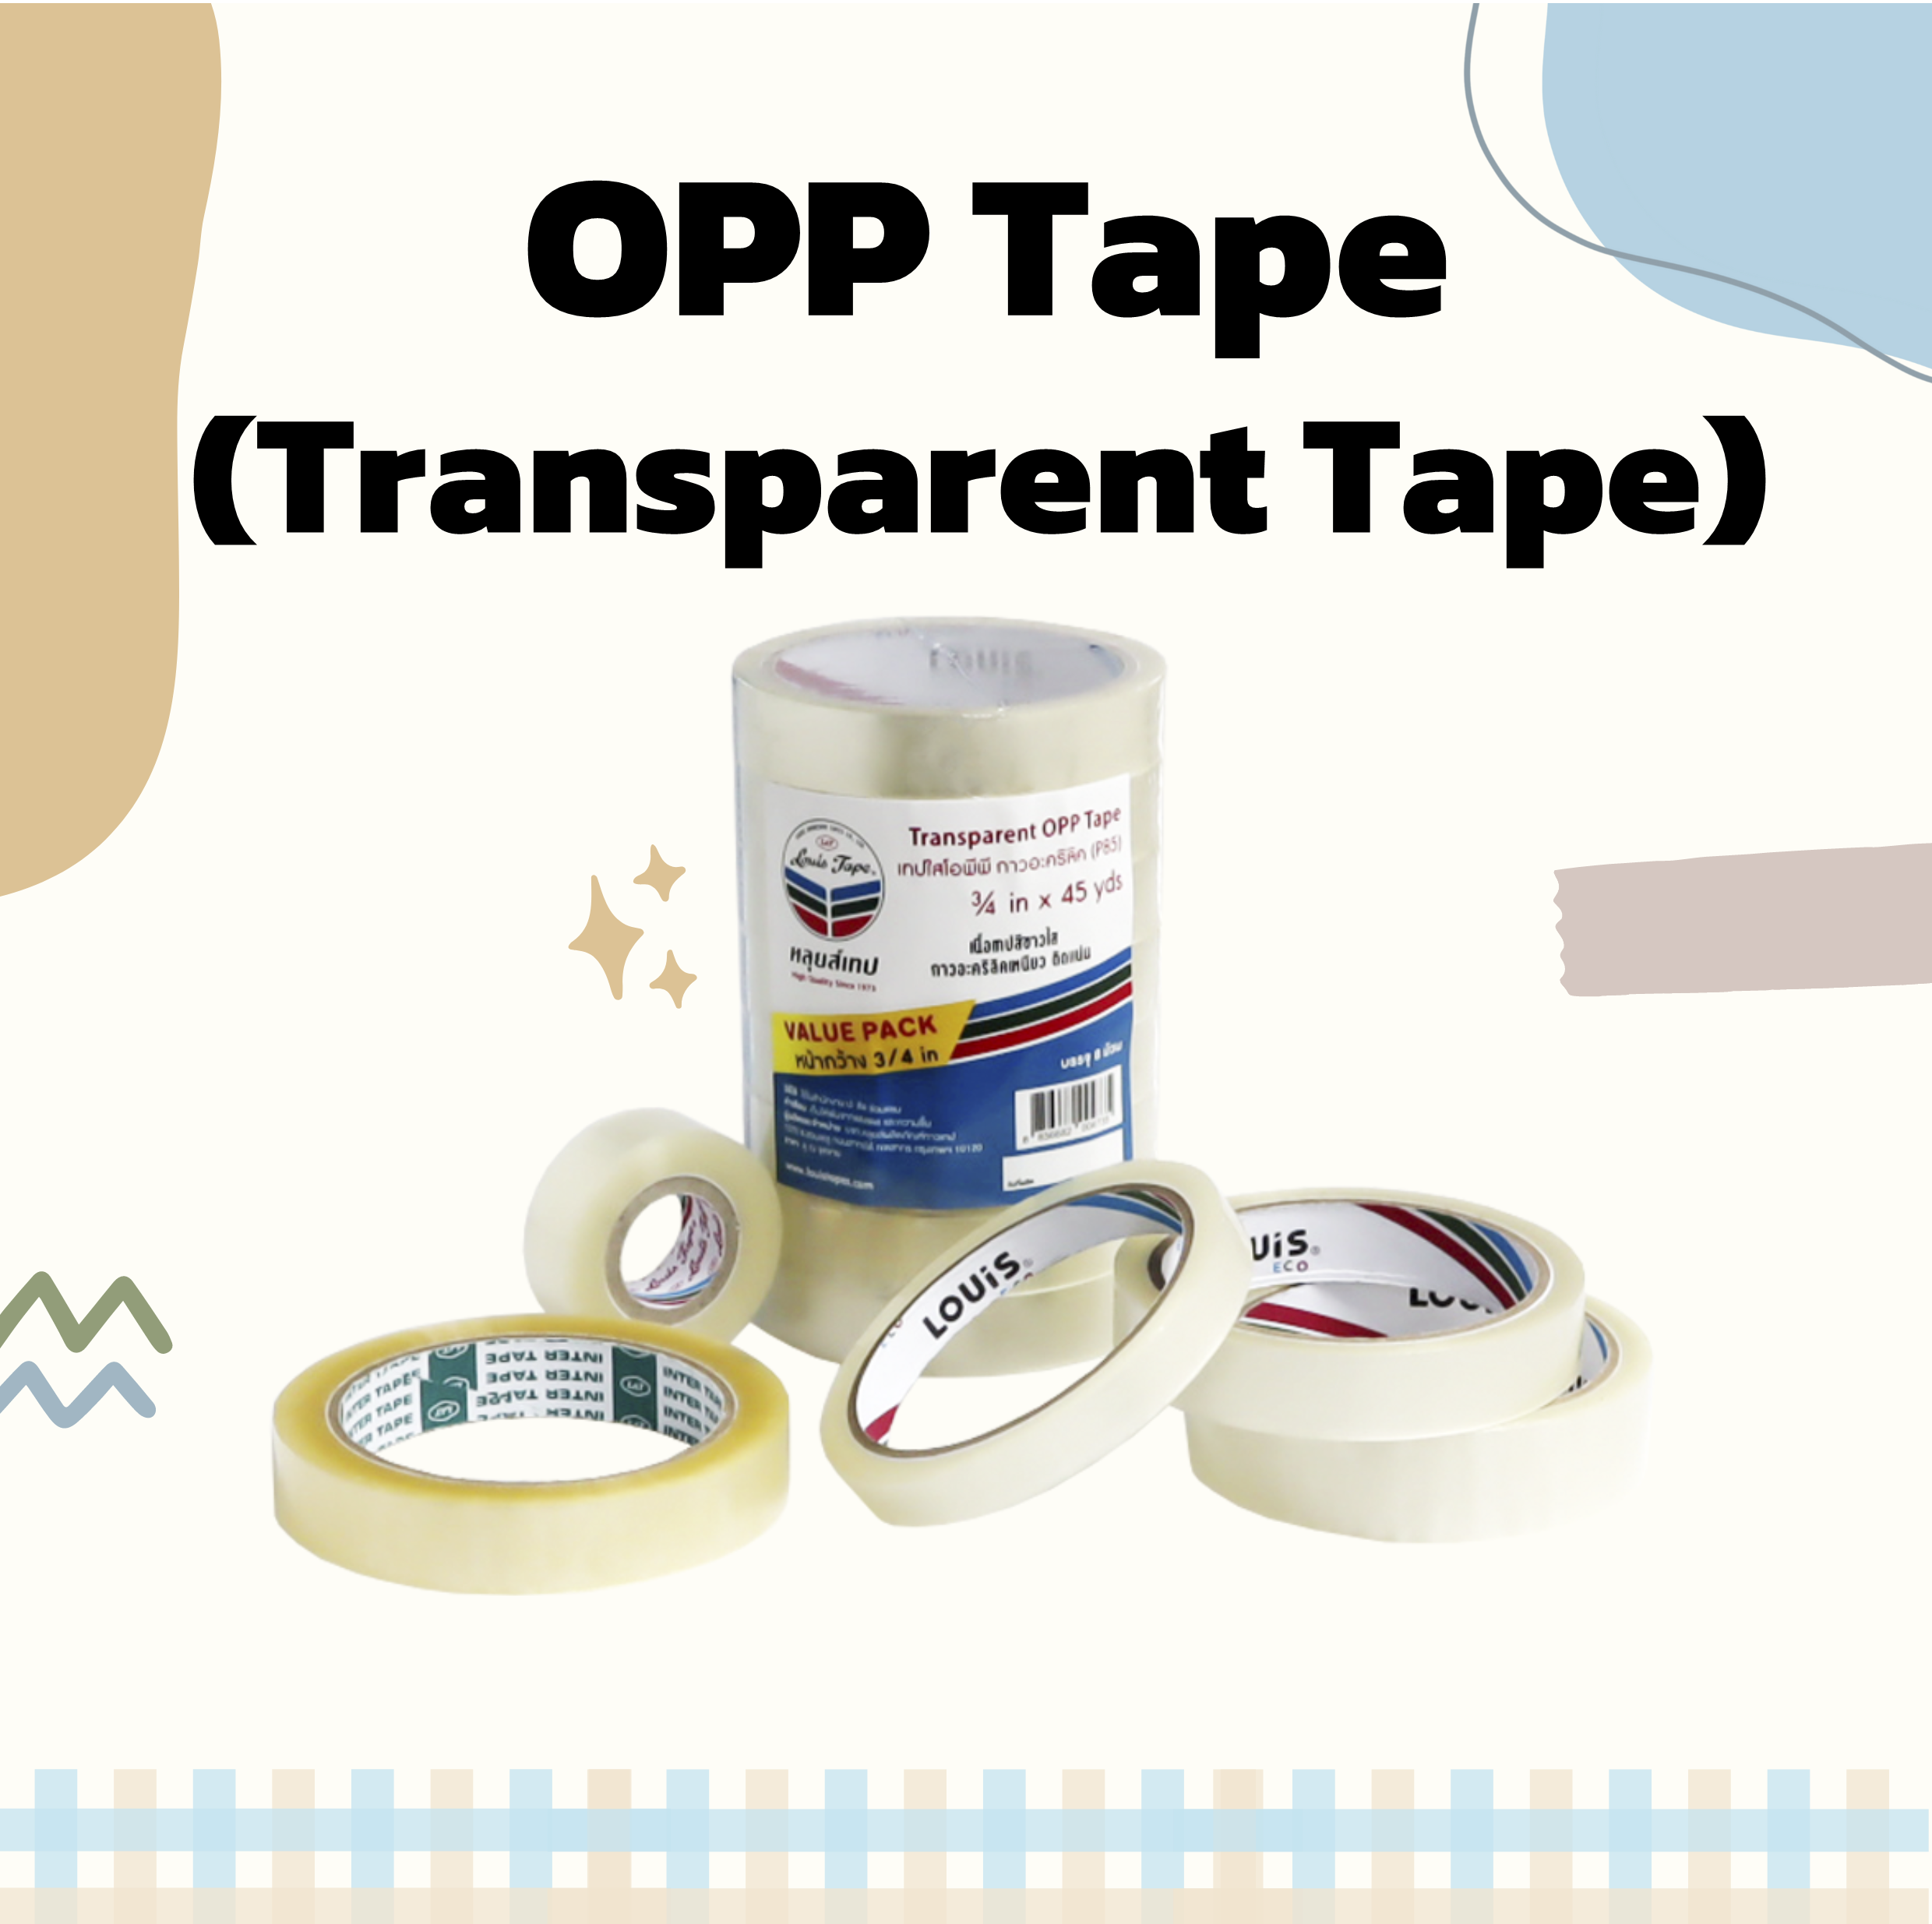 What's the difference between Cellulose Tape and OPP Tape?